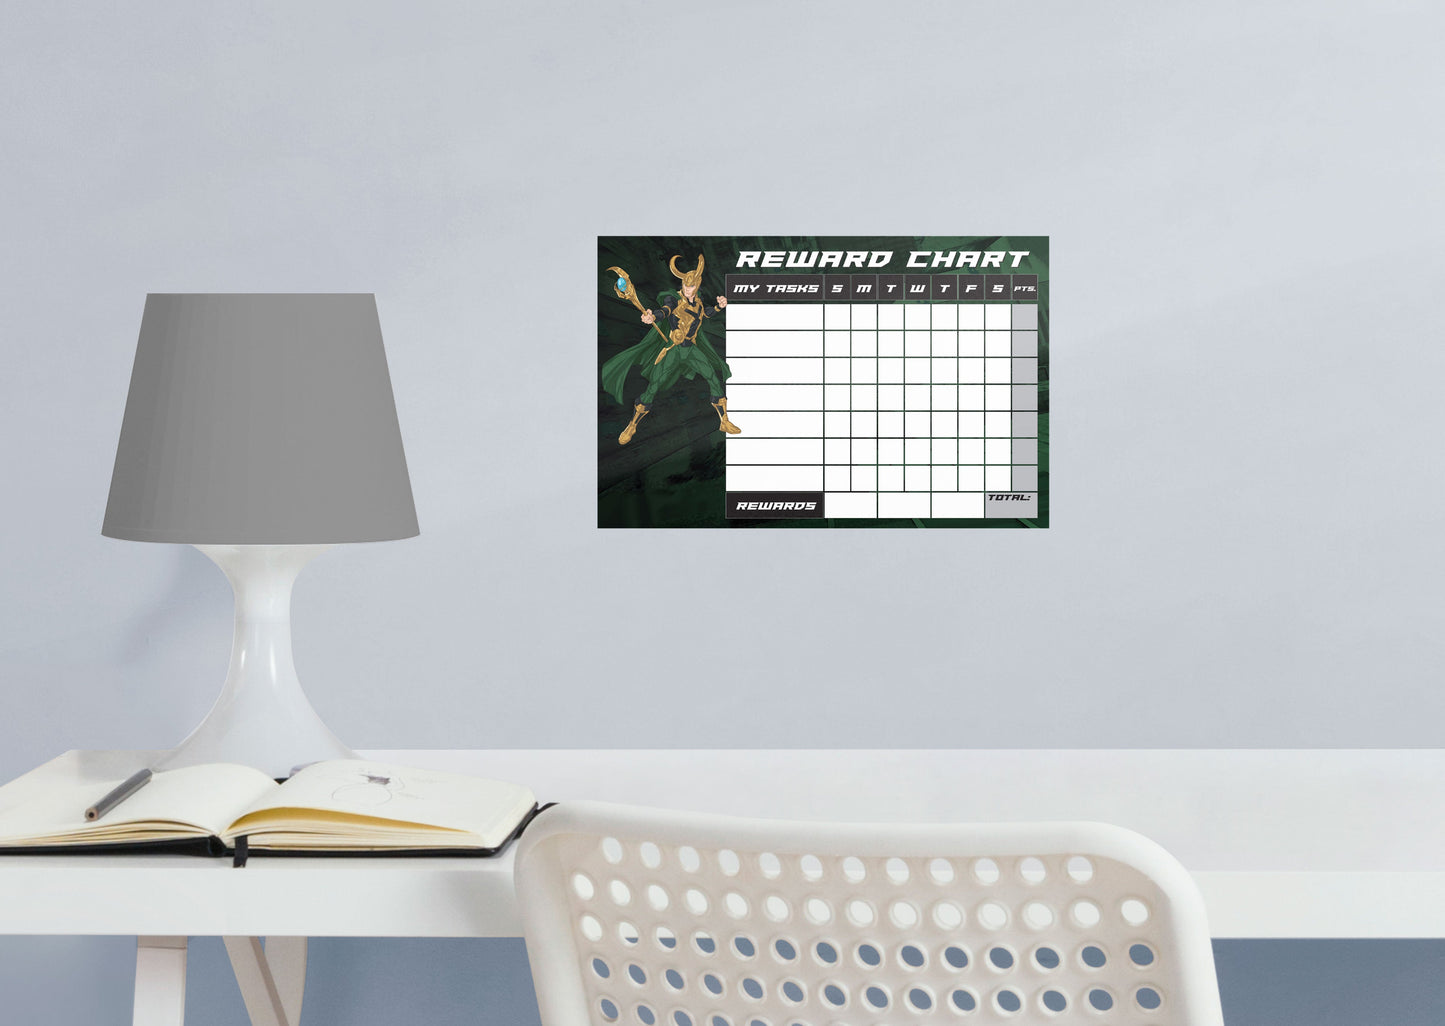 Avengers: LOKI Reward Chart Dry Erase        - Officially Licensed Marvel Removable Wall   Adhesive Decal